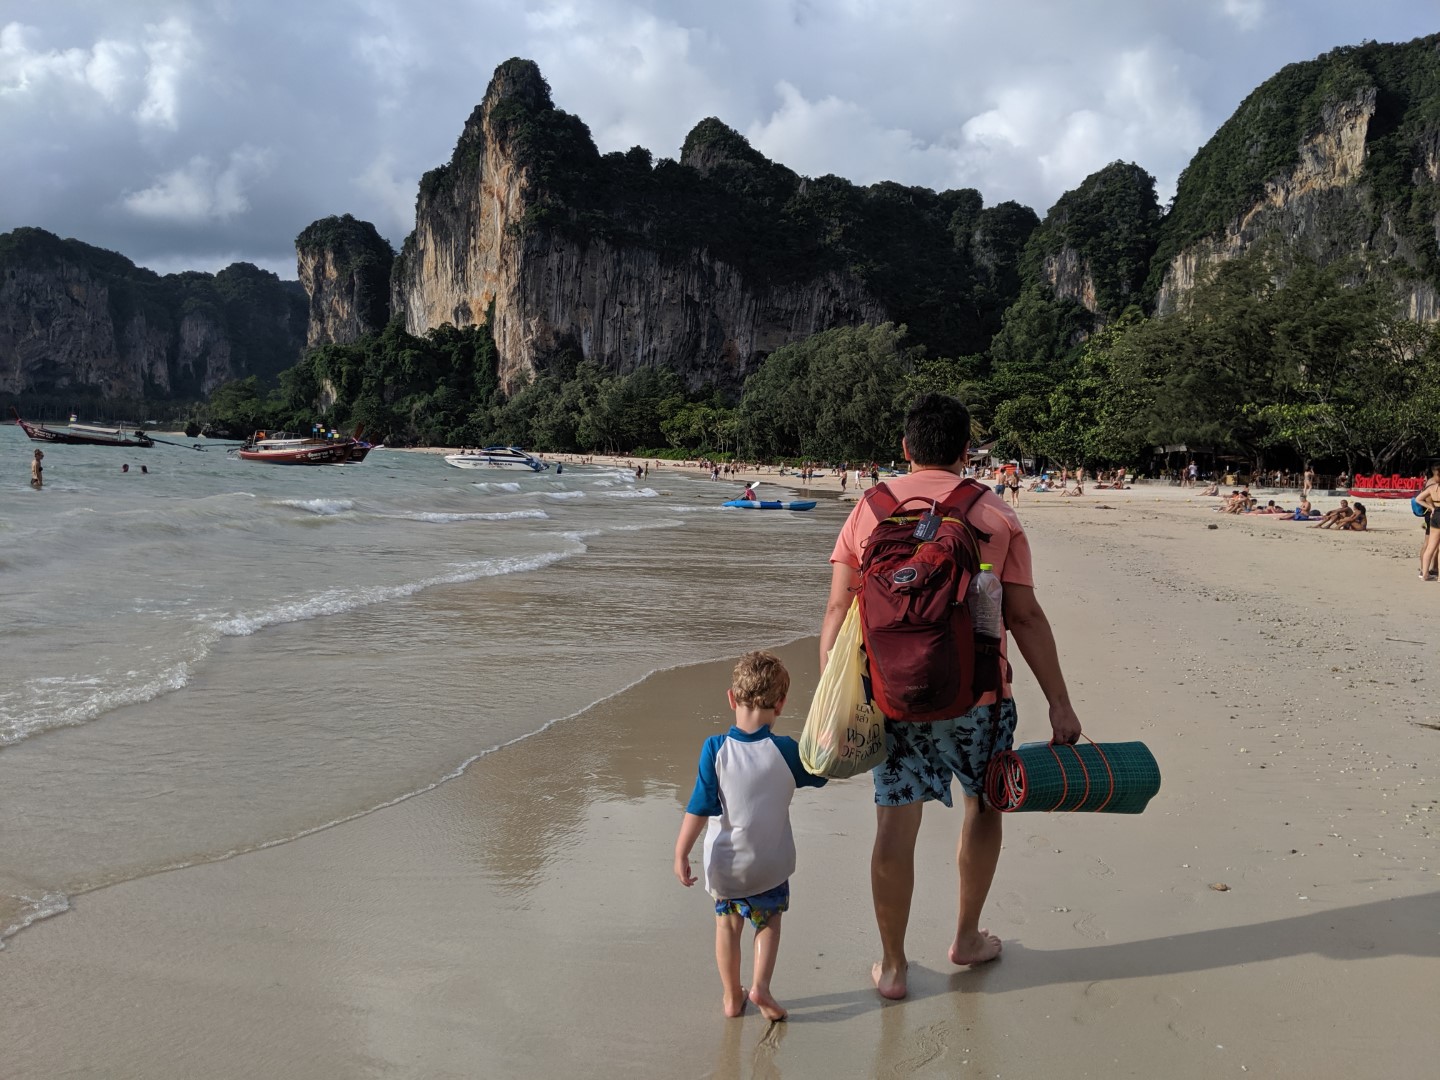 Walking to Railay beach- yes it's possible - While You Stay Home